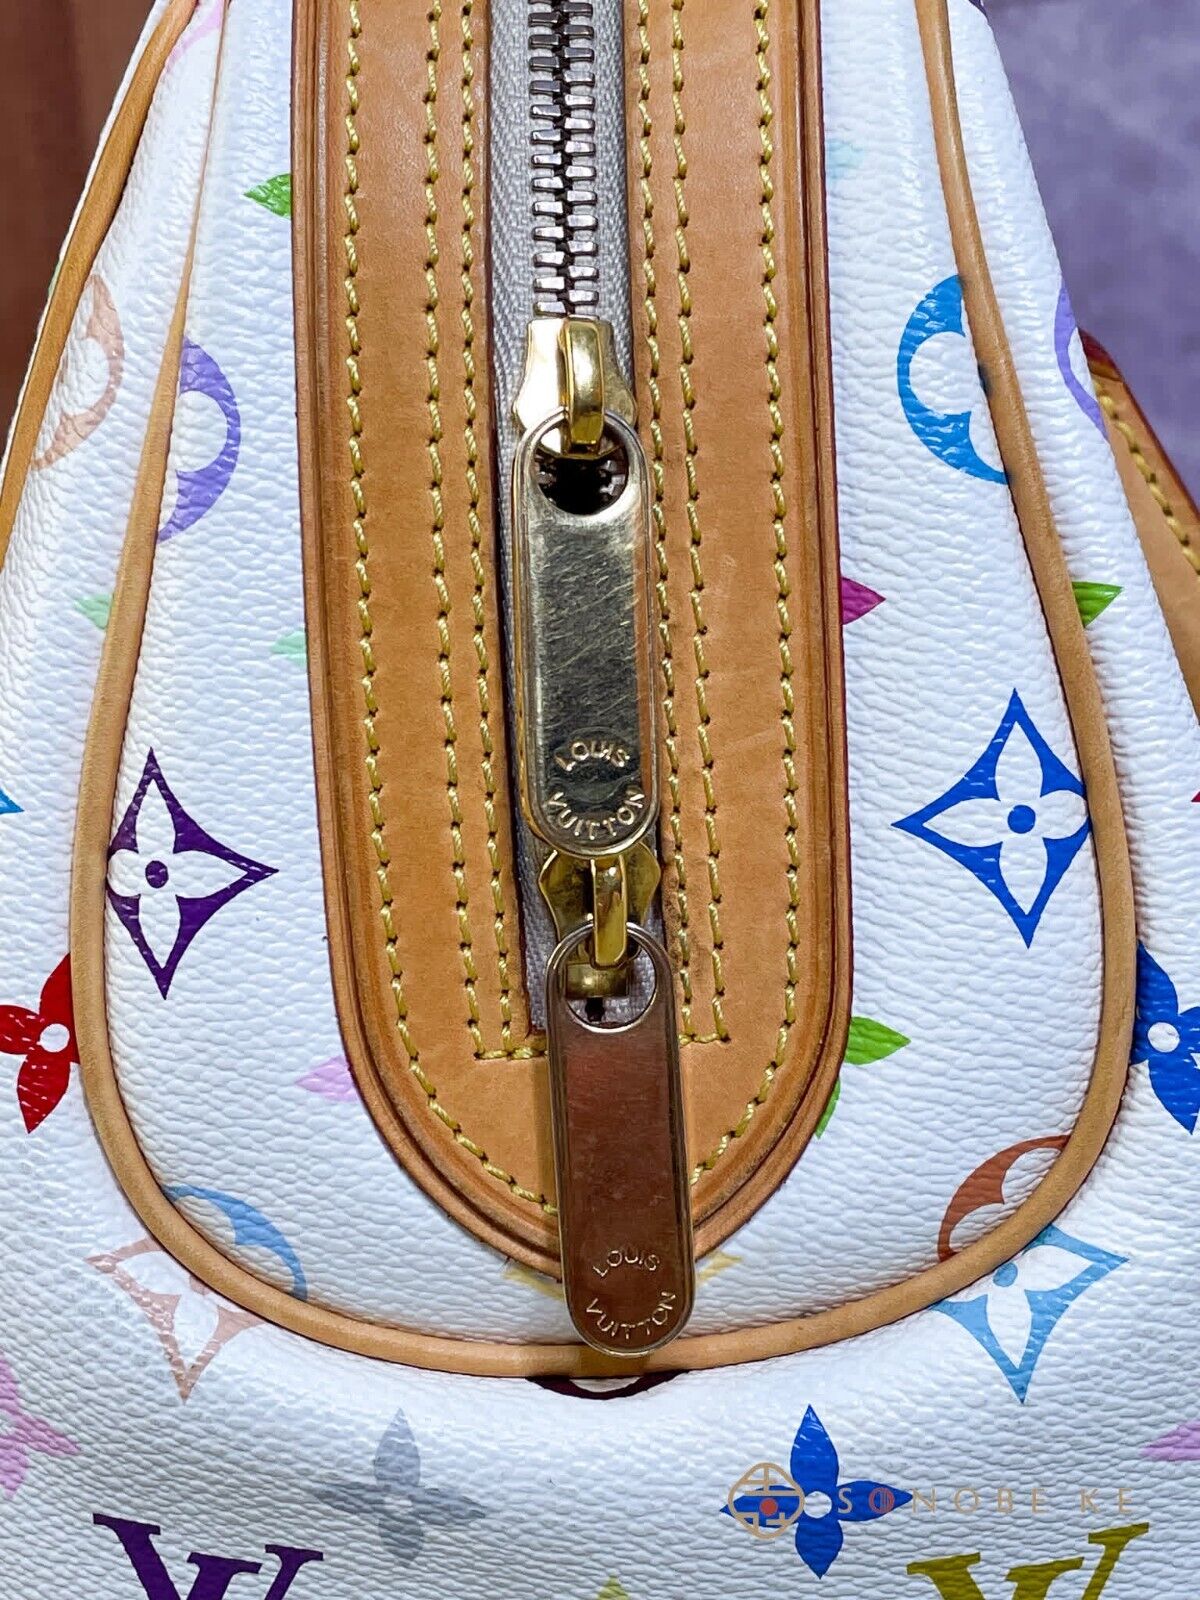 Sold at Auction: Louis Vuitton, LOUIS VUITTON PARIS MADE IN CHINA FOR LV  W/STRAP